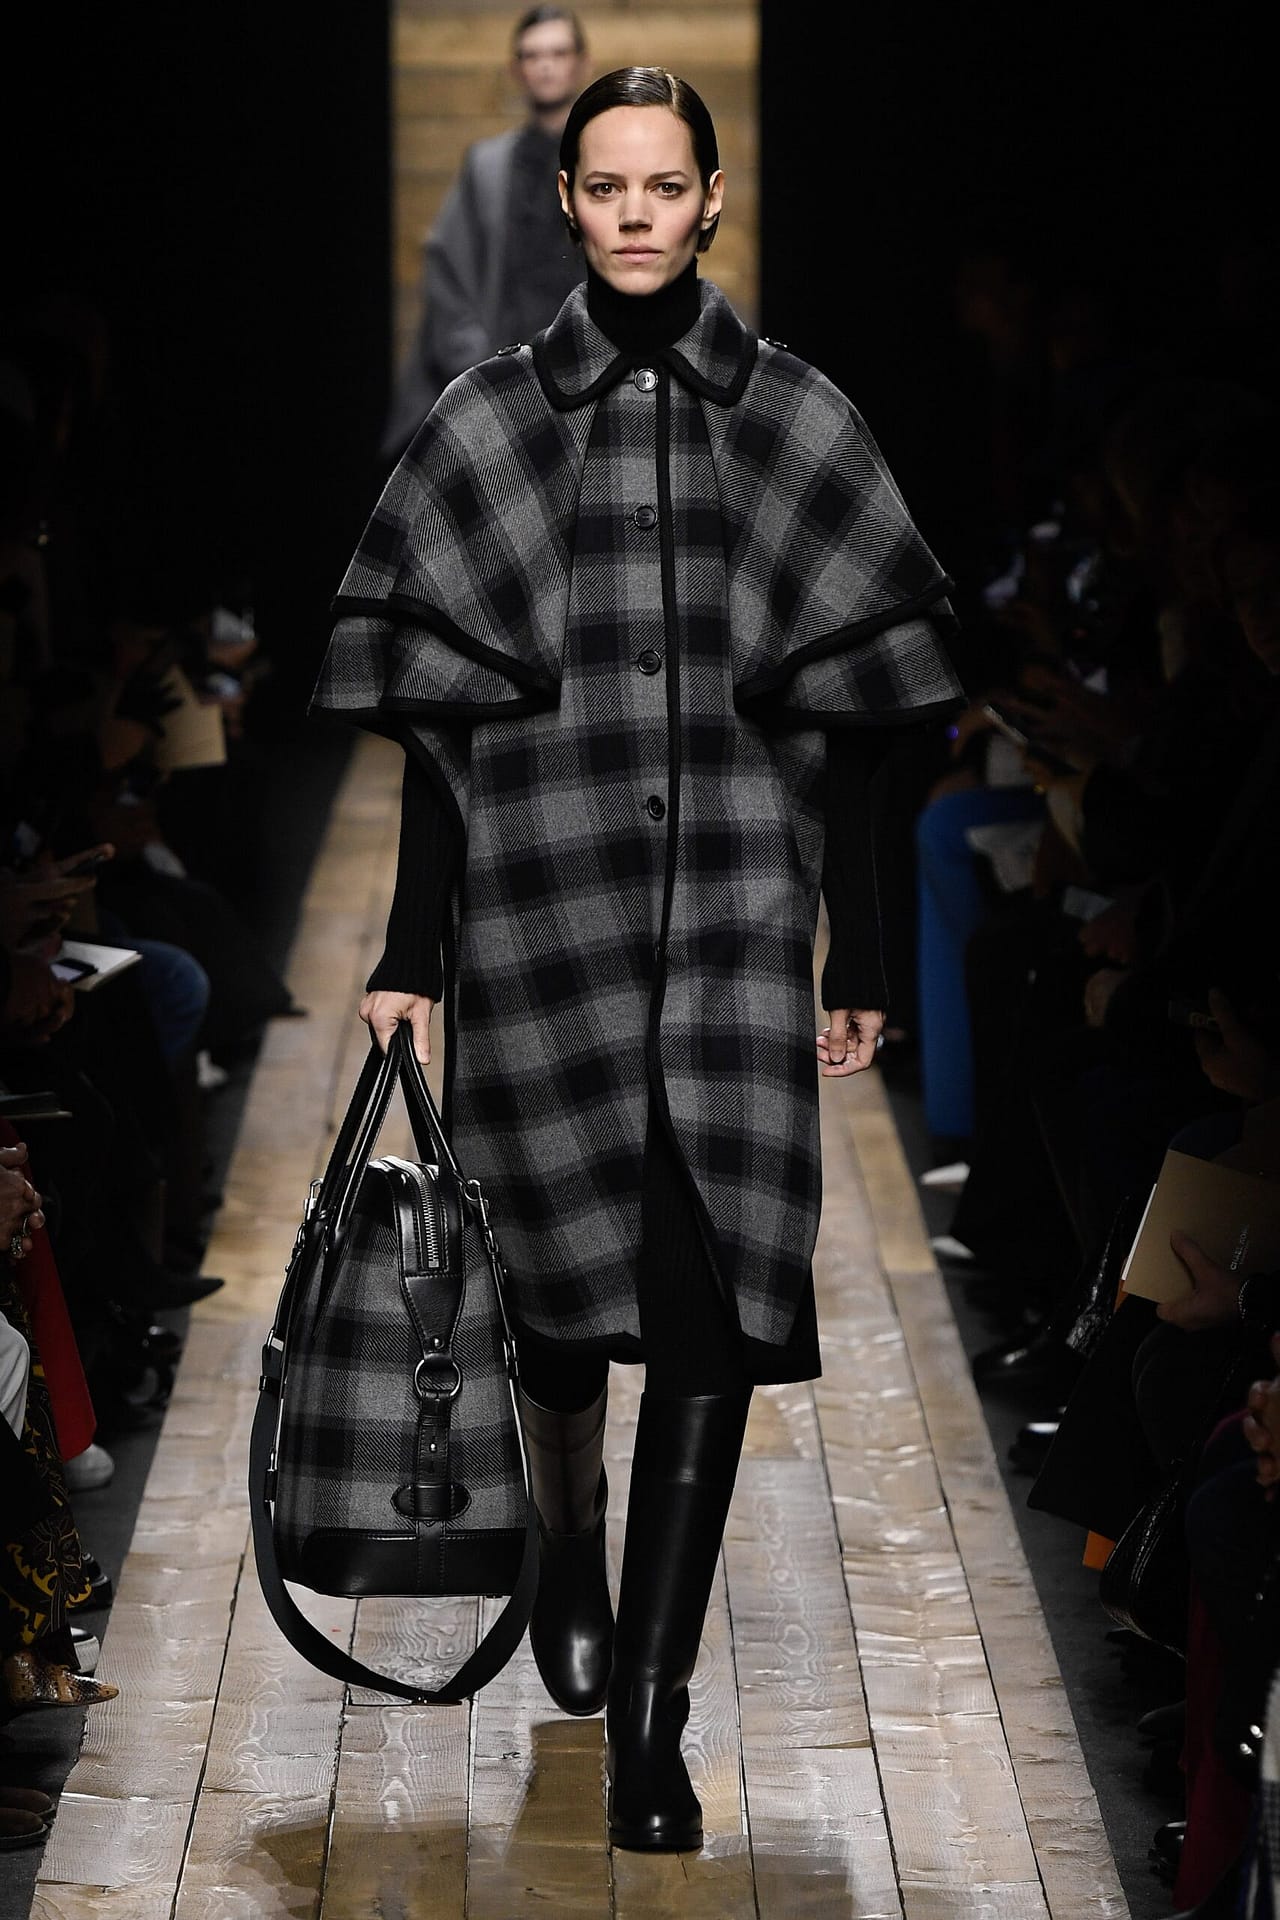 Michael Kors Collection Fall 2020 ready-to-wear